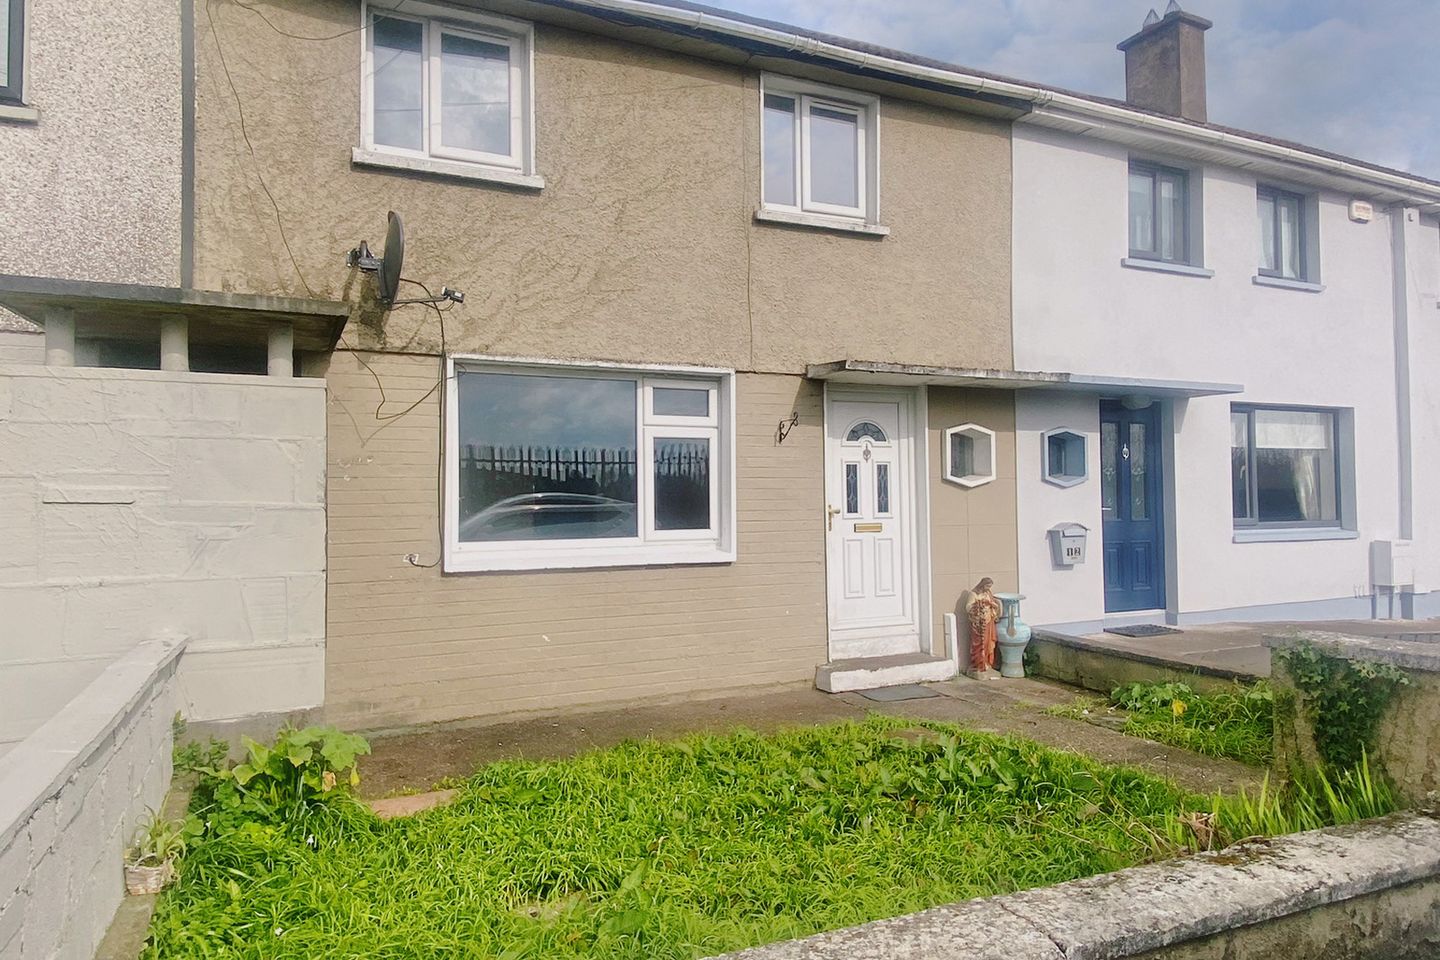 11 Father Rogers Park, Old Mallow Road, Blackpool, Co. Cork, T23R9C9